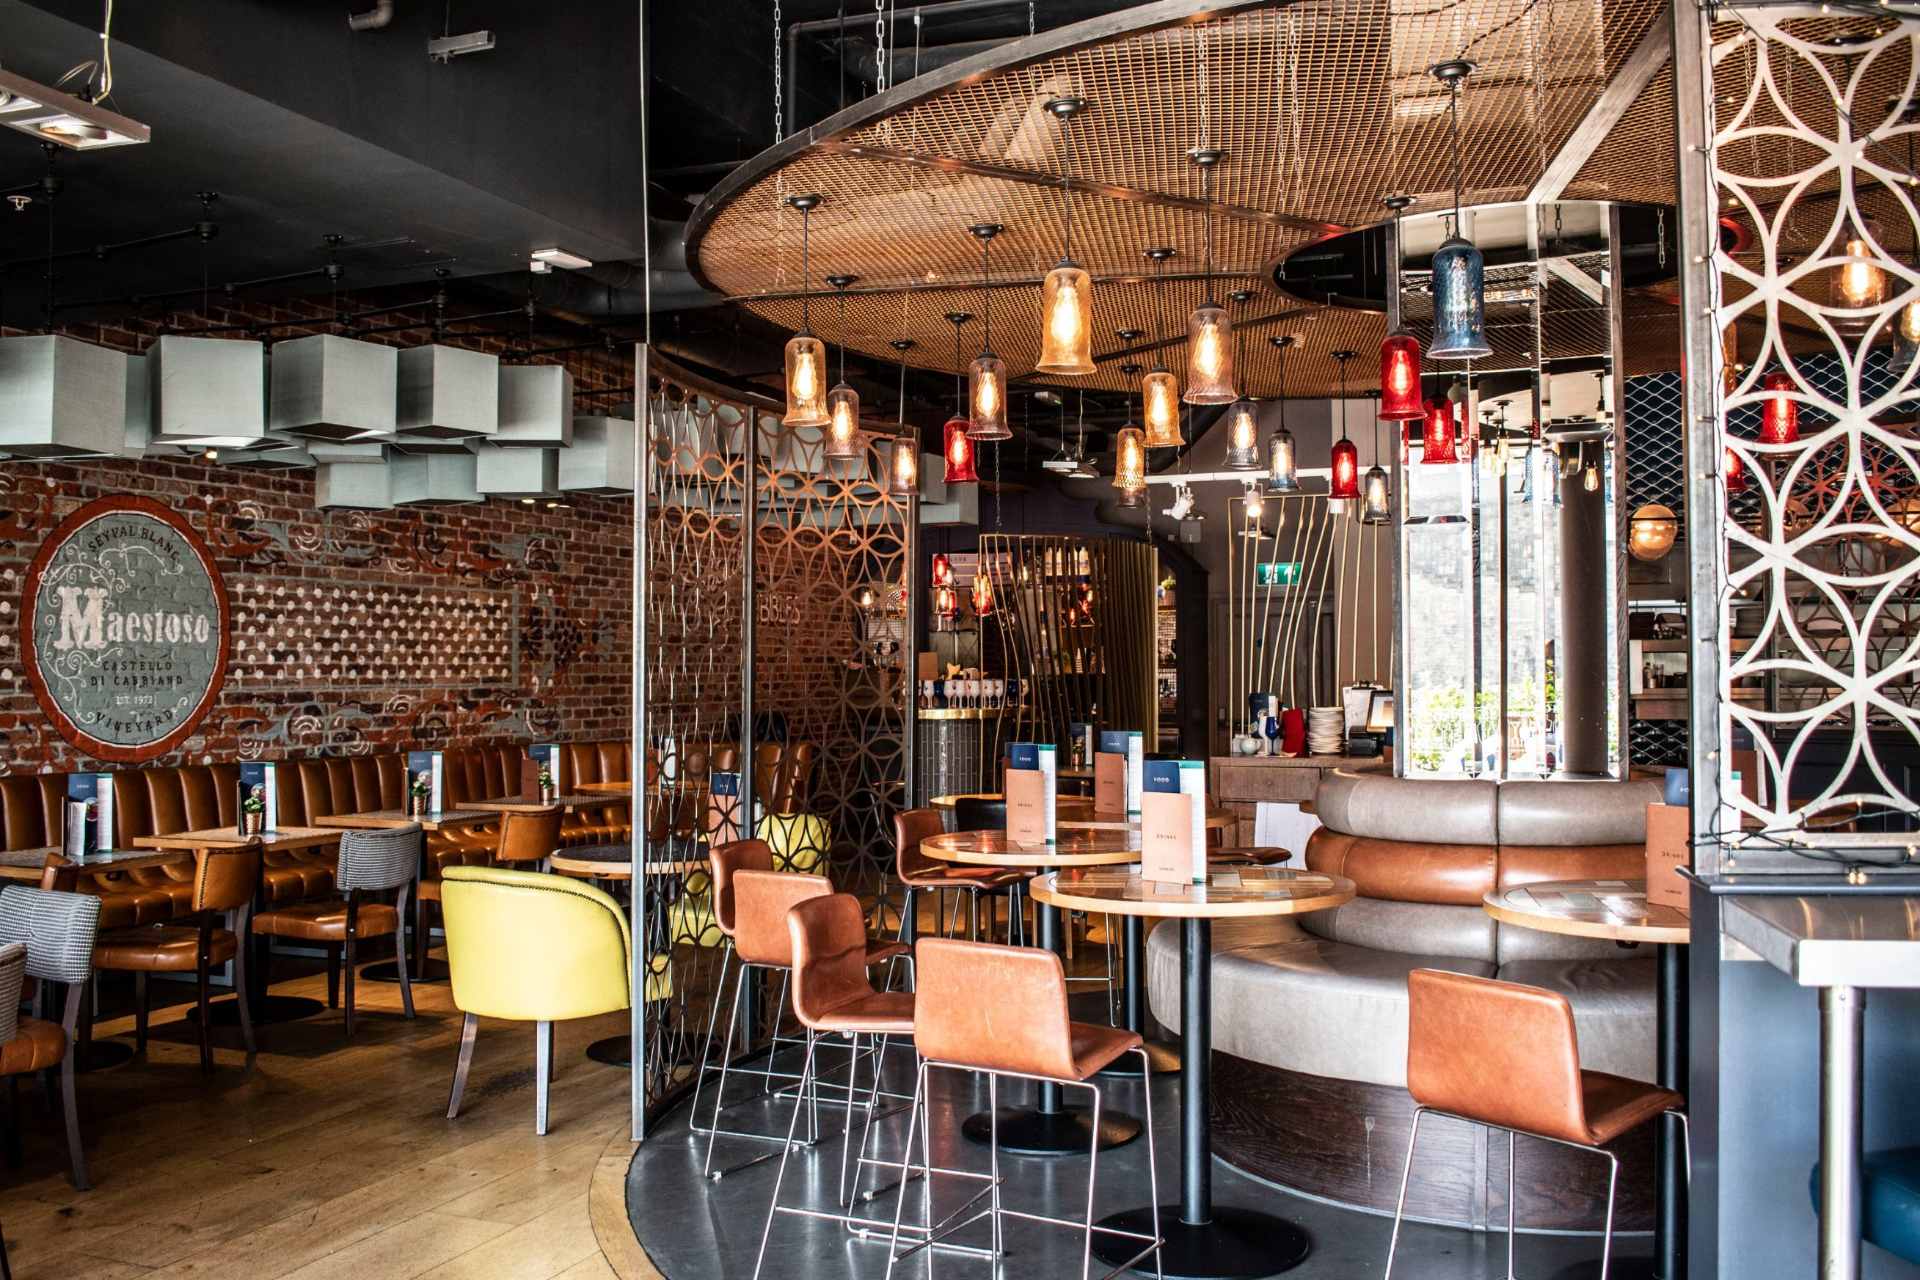 rustic-and-industrial-interior-of-all-bar-one-restaurant-bottomless-brunch-southampton